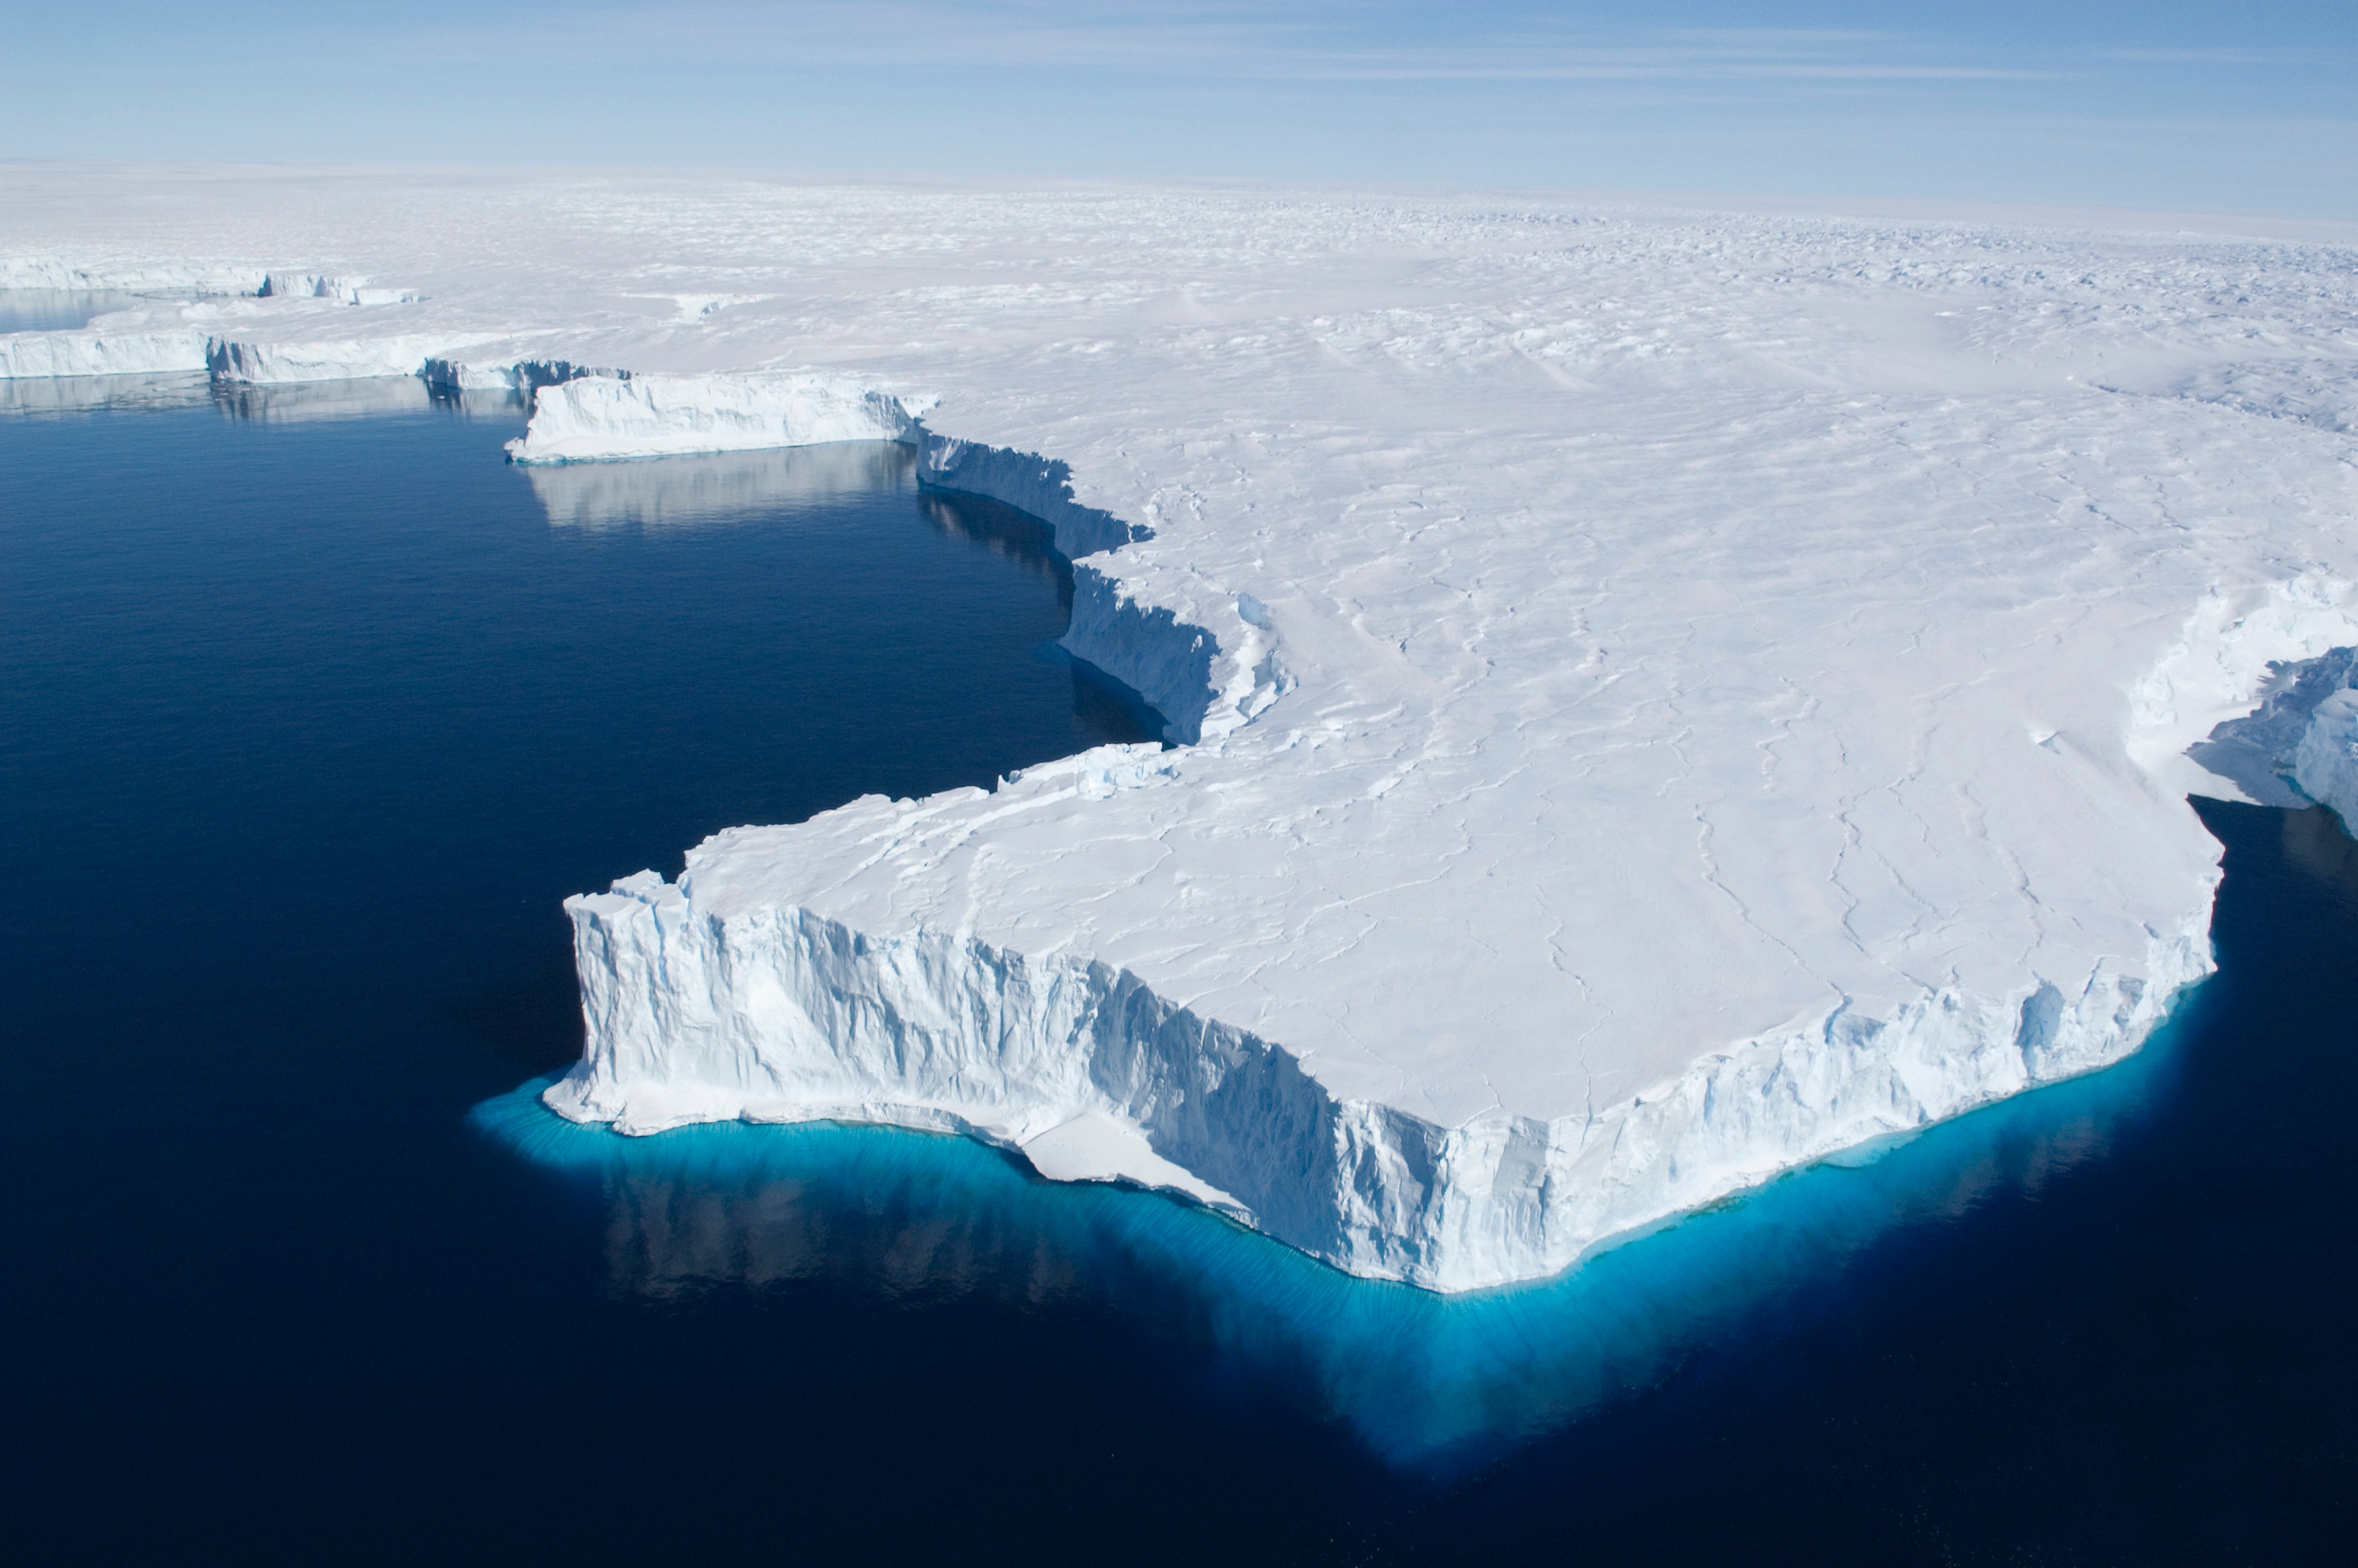 Antarctica's Ice Shelves Have Lost Millions of Metric Tons of Ice -  Scientific American